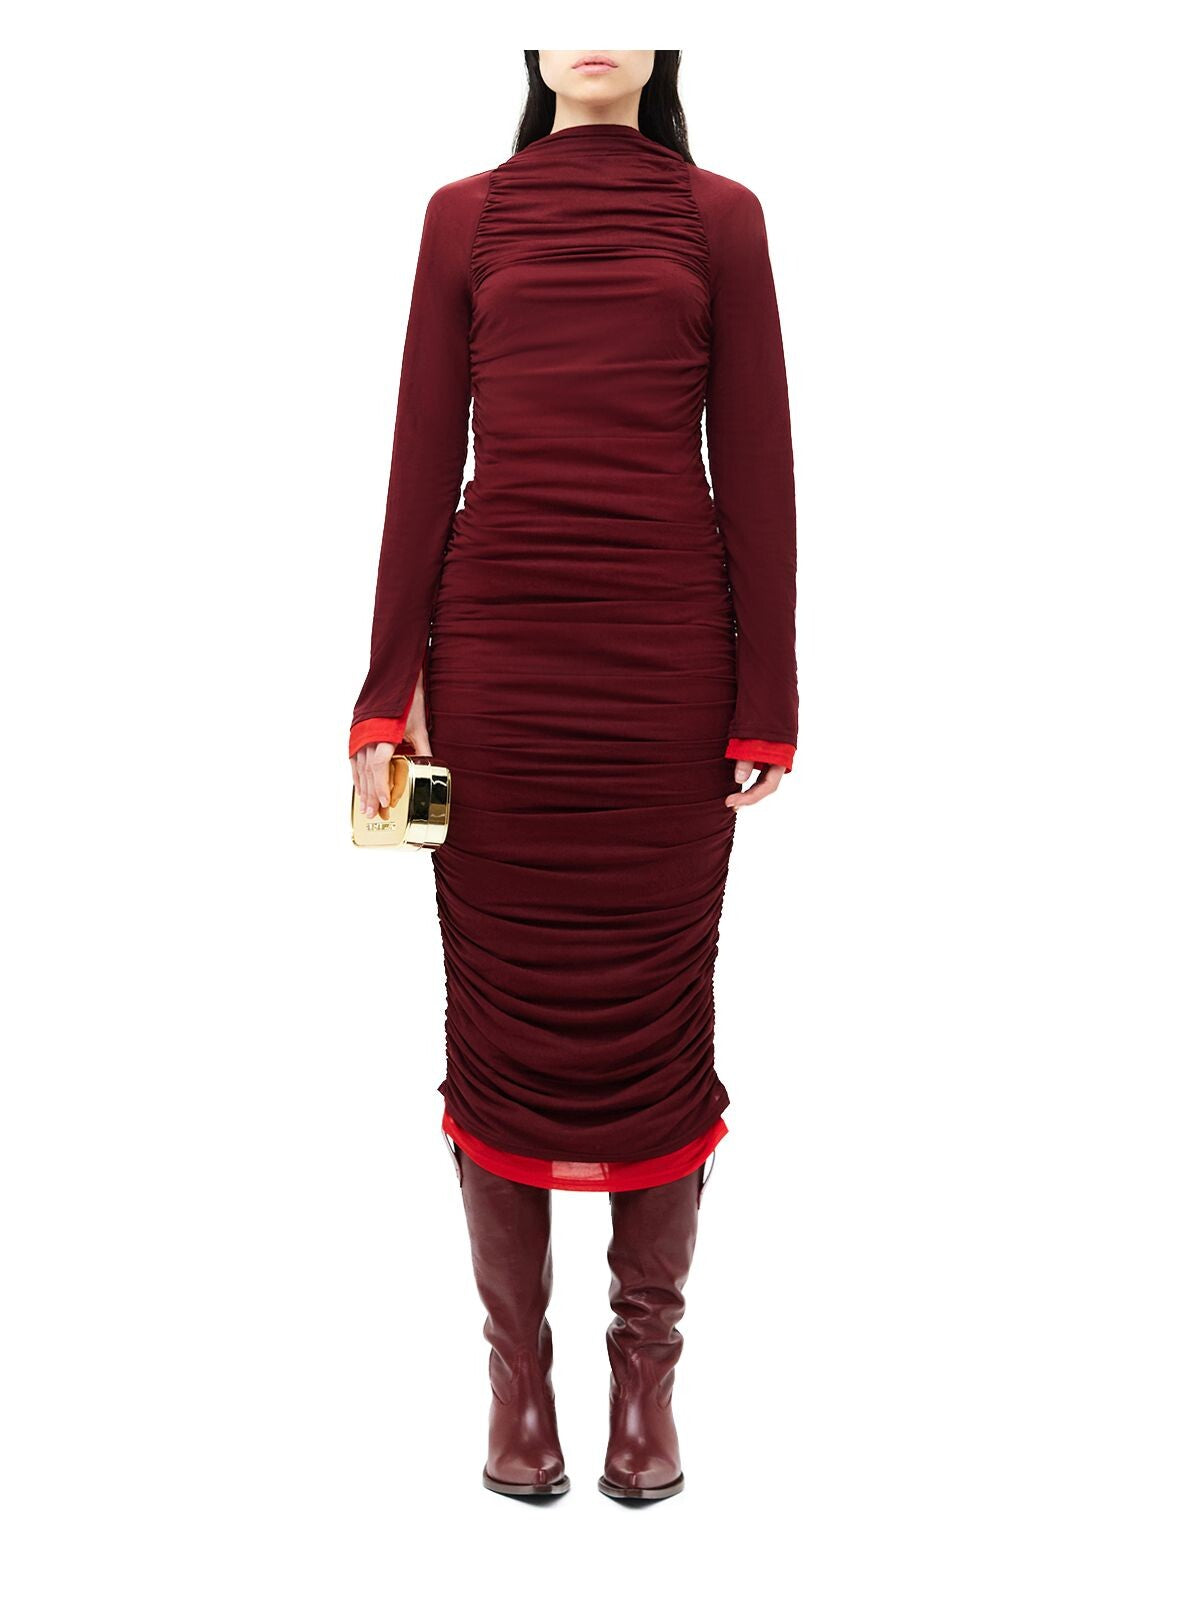 MESH SIMON MILLER Womens Maroon Ruched Pullover Lined Color Block Long Sleeve Mock Neck Midi Cocktail Body Con Dress S